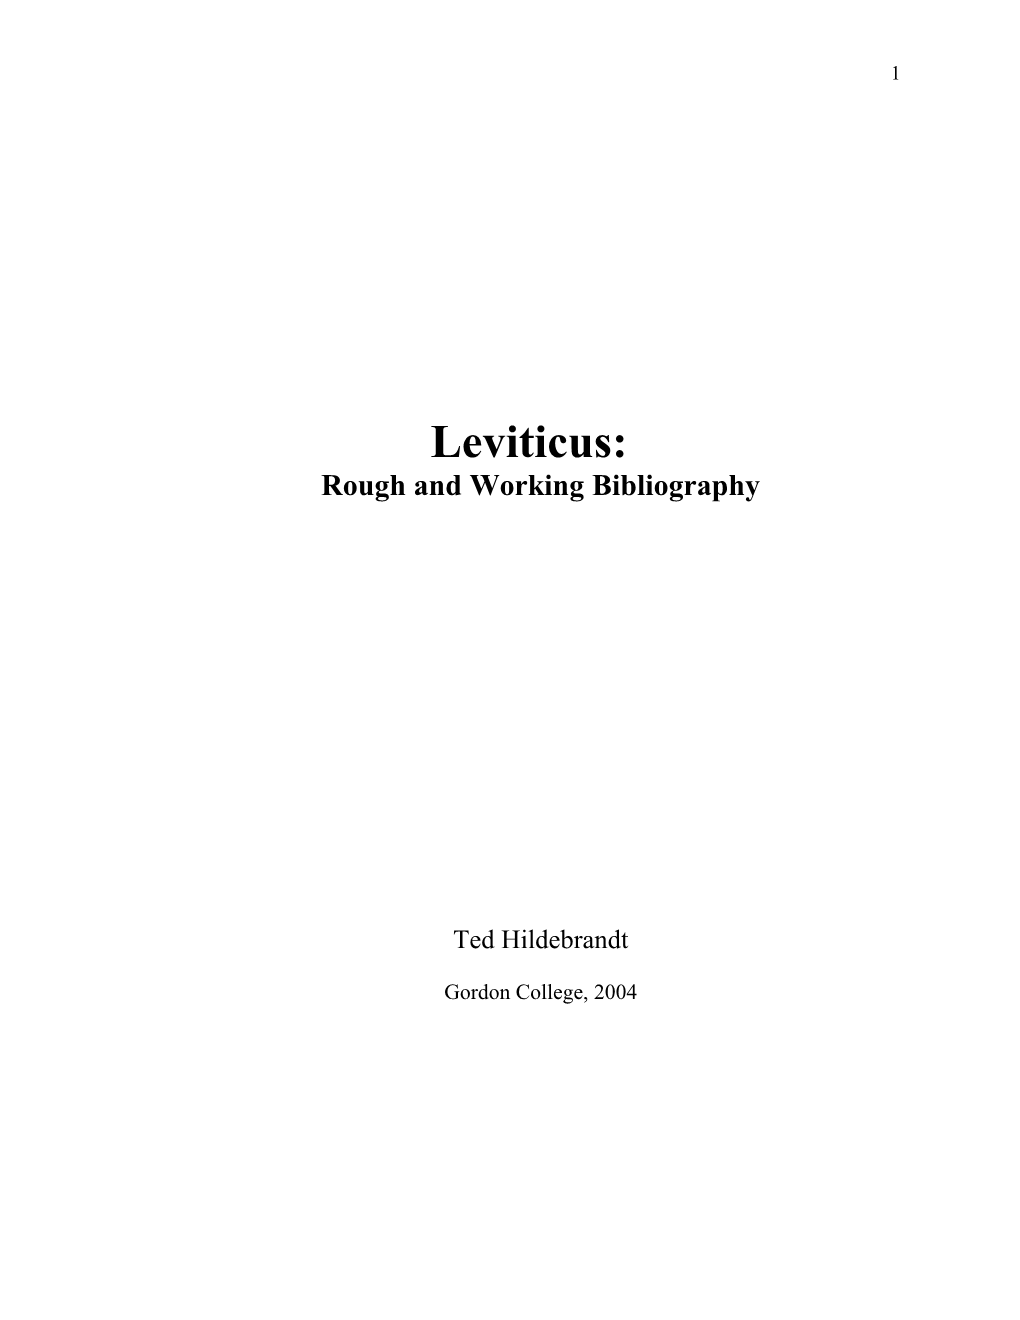 Rough and Working Bibliography